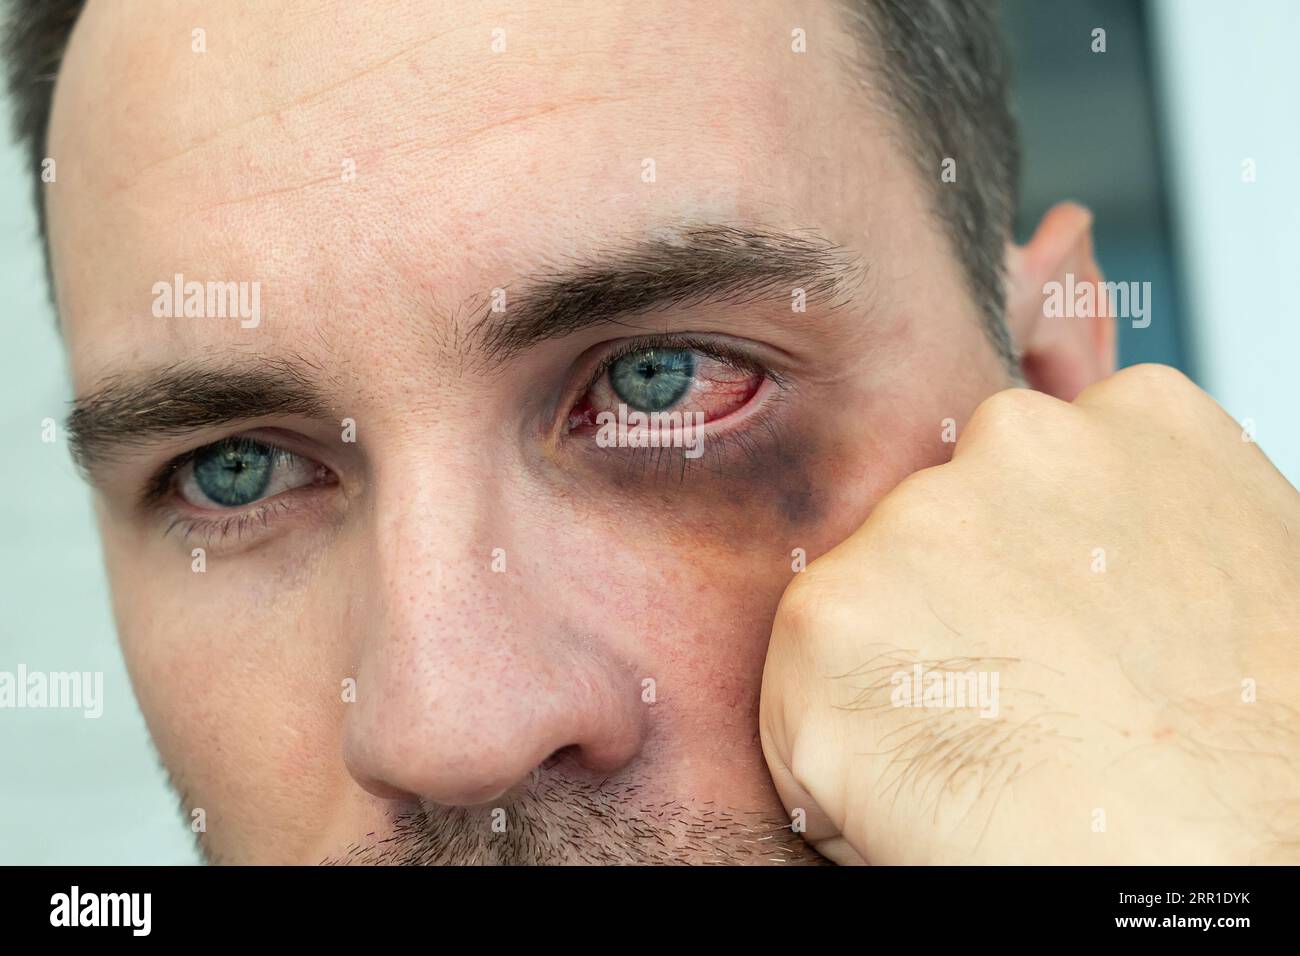 Bruises, abrasions, bruising under the eye of a young man. the consequences of punching a man in the eye concept. trauma to the face after a beating. Stock Photo